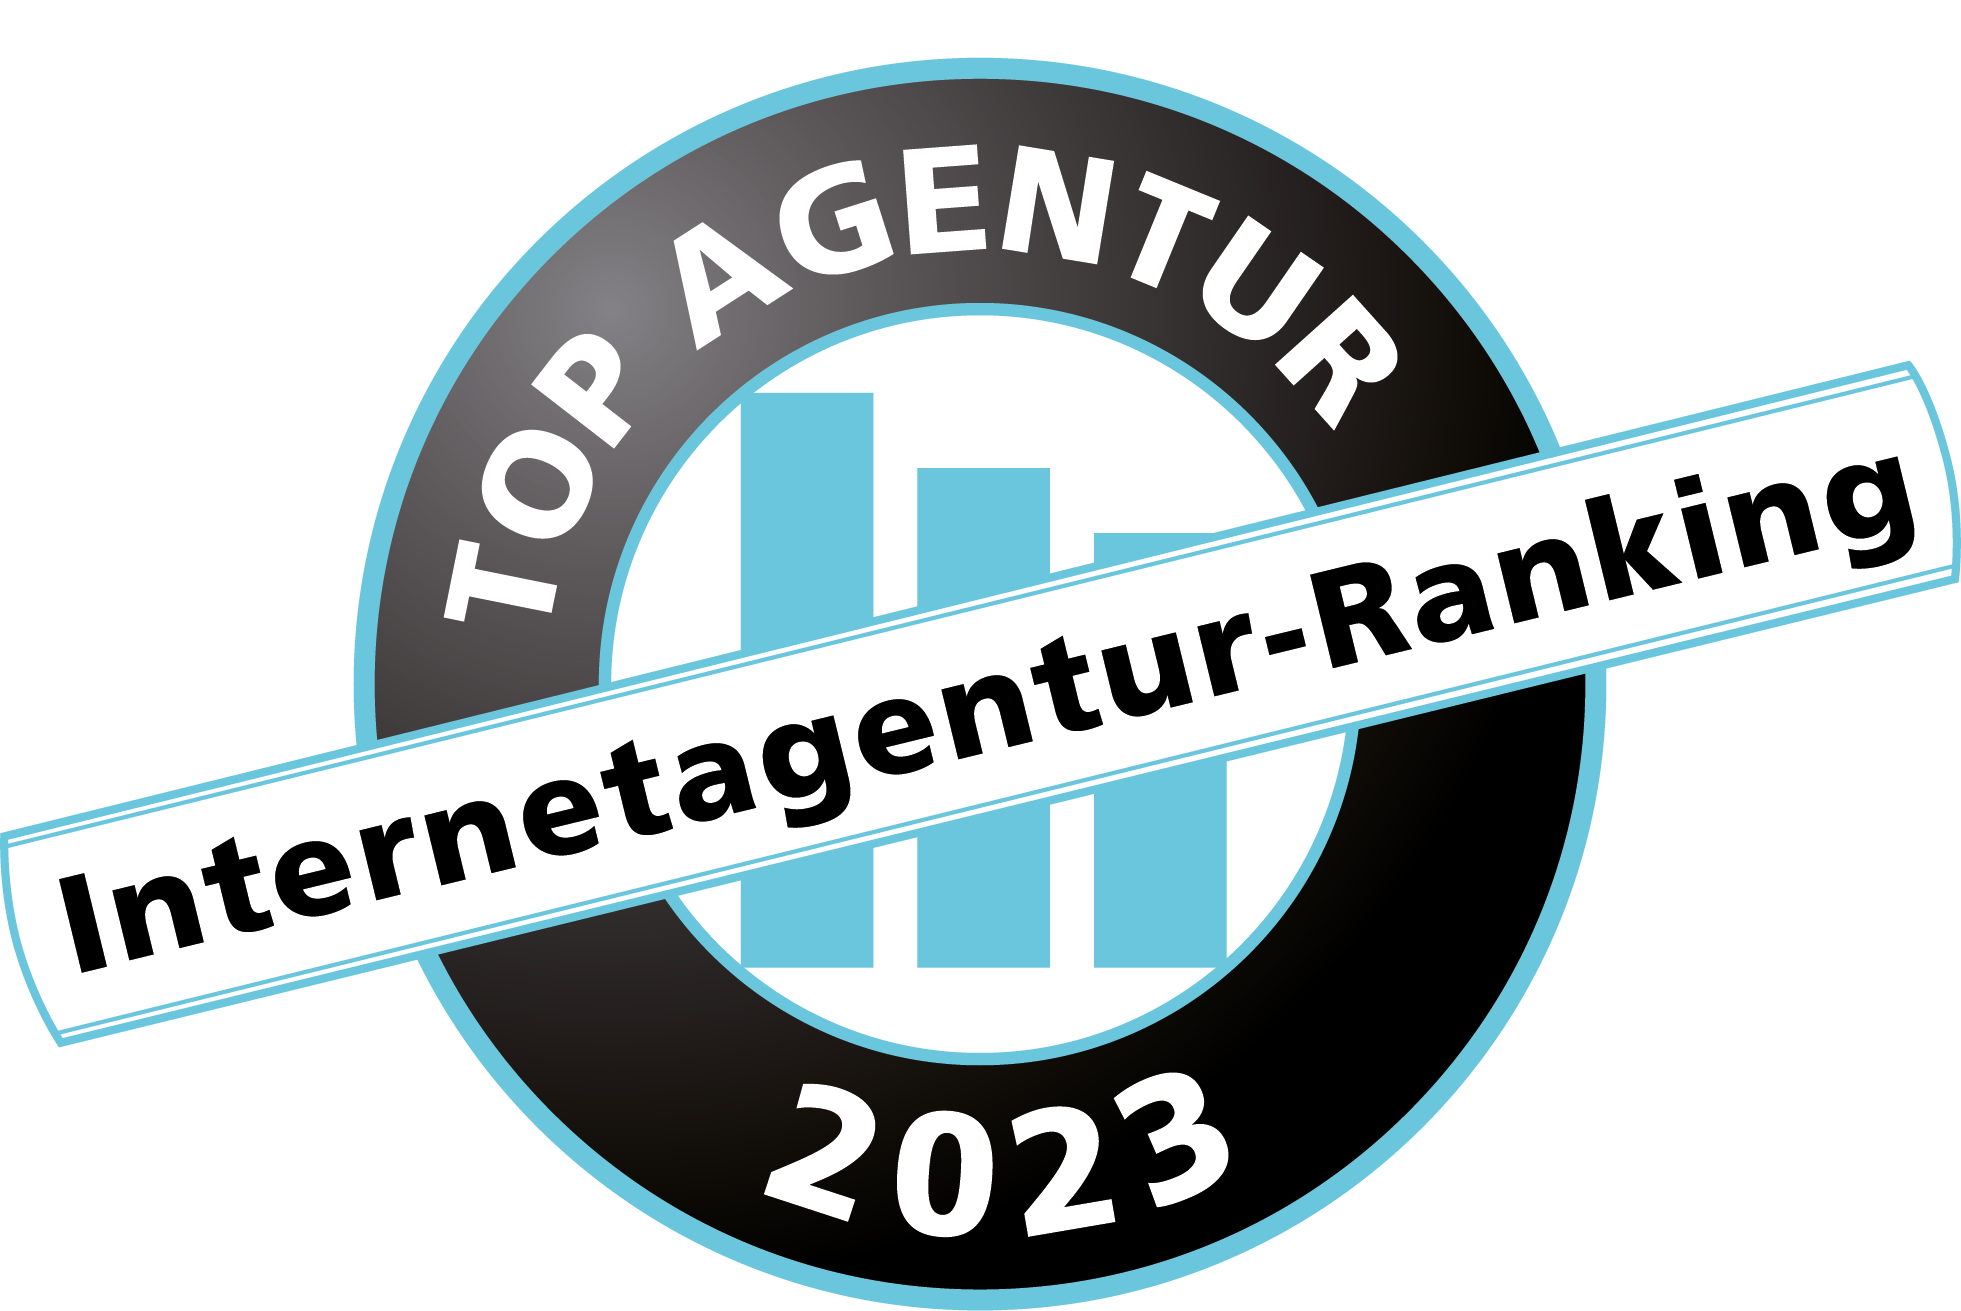 valantic takes 7th place in the internet agency ranking of the Bundesverband Digitale Wirtschaft e.V.